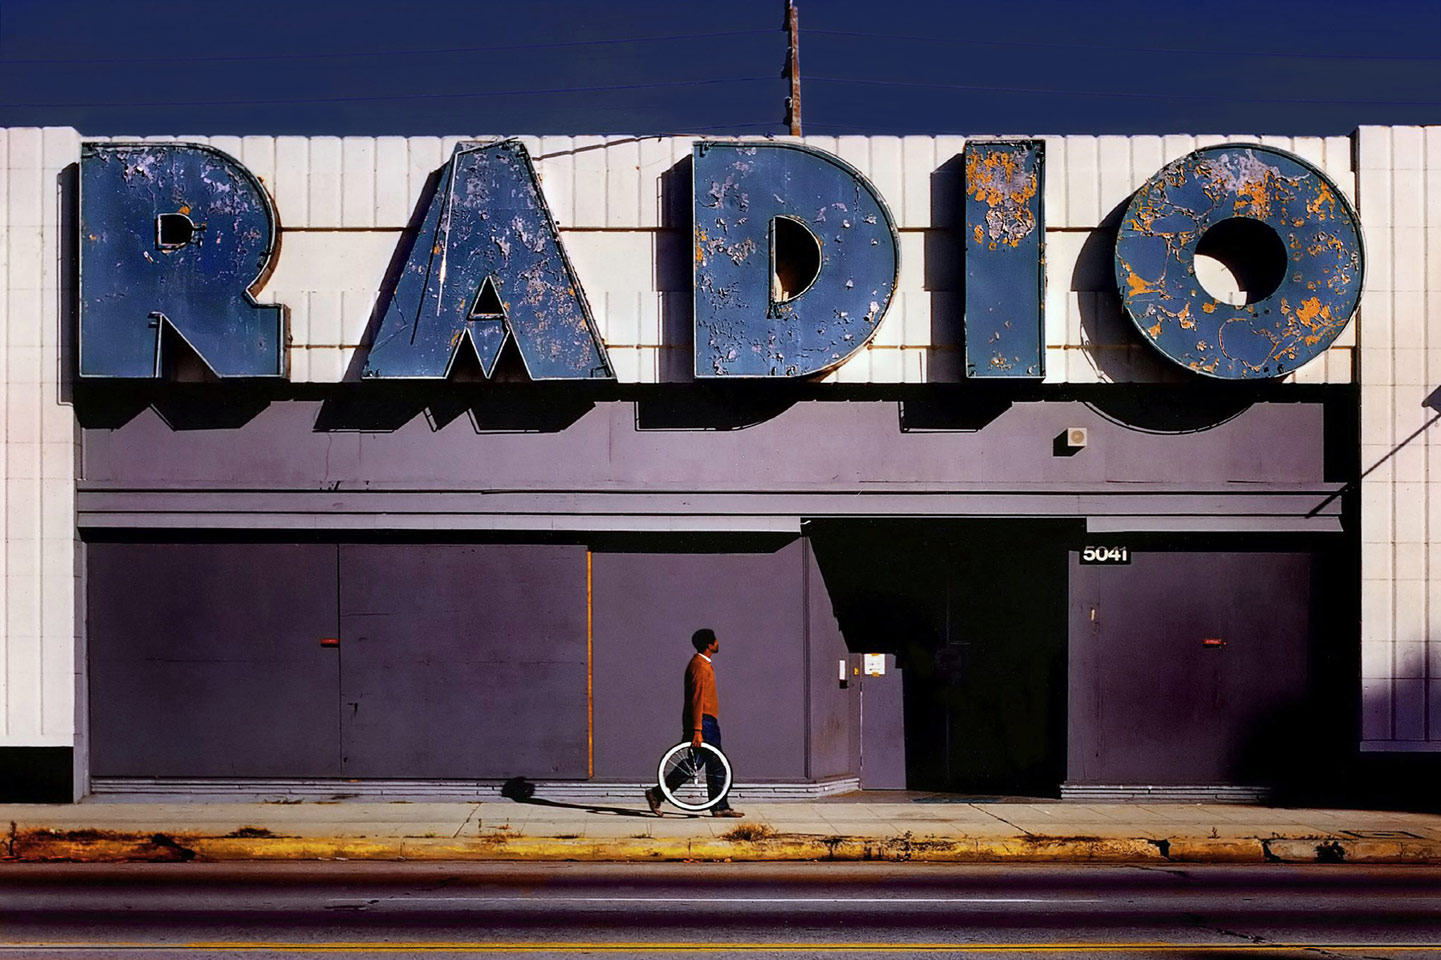 Radio, by Jody Miller (USA)

1st place in the Cityscape/Architecture category